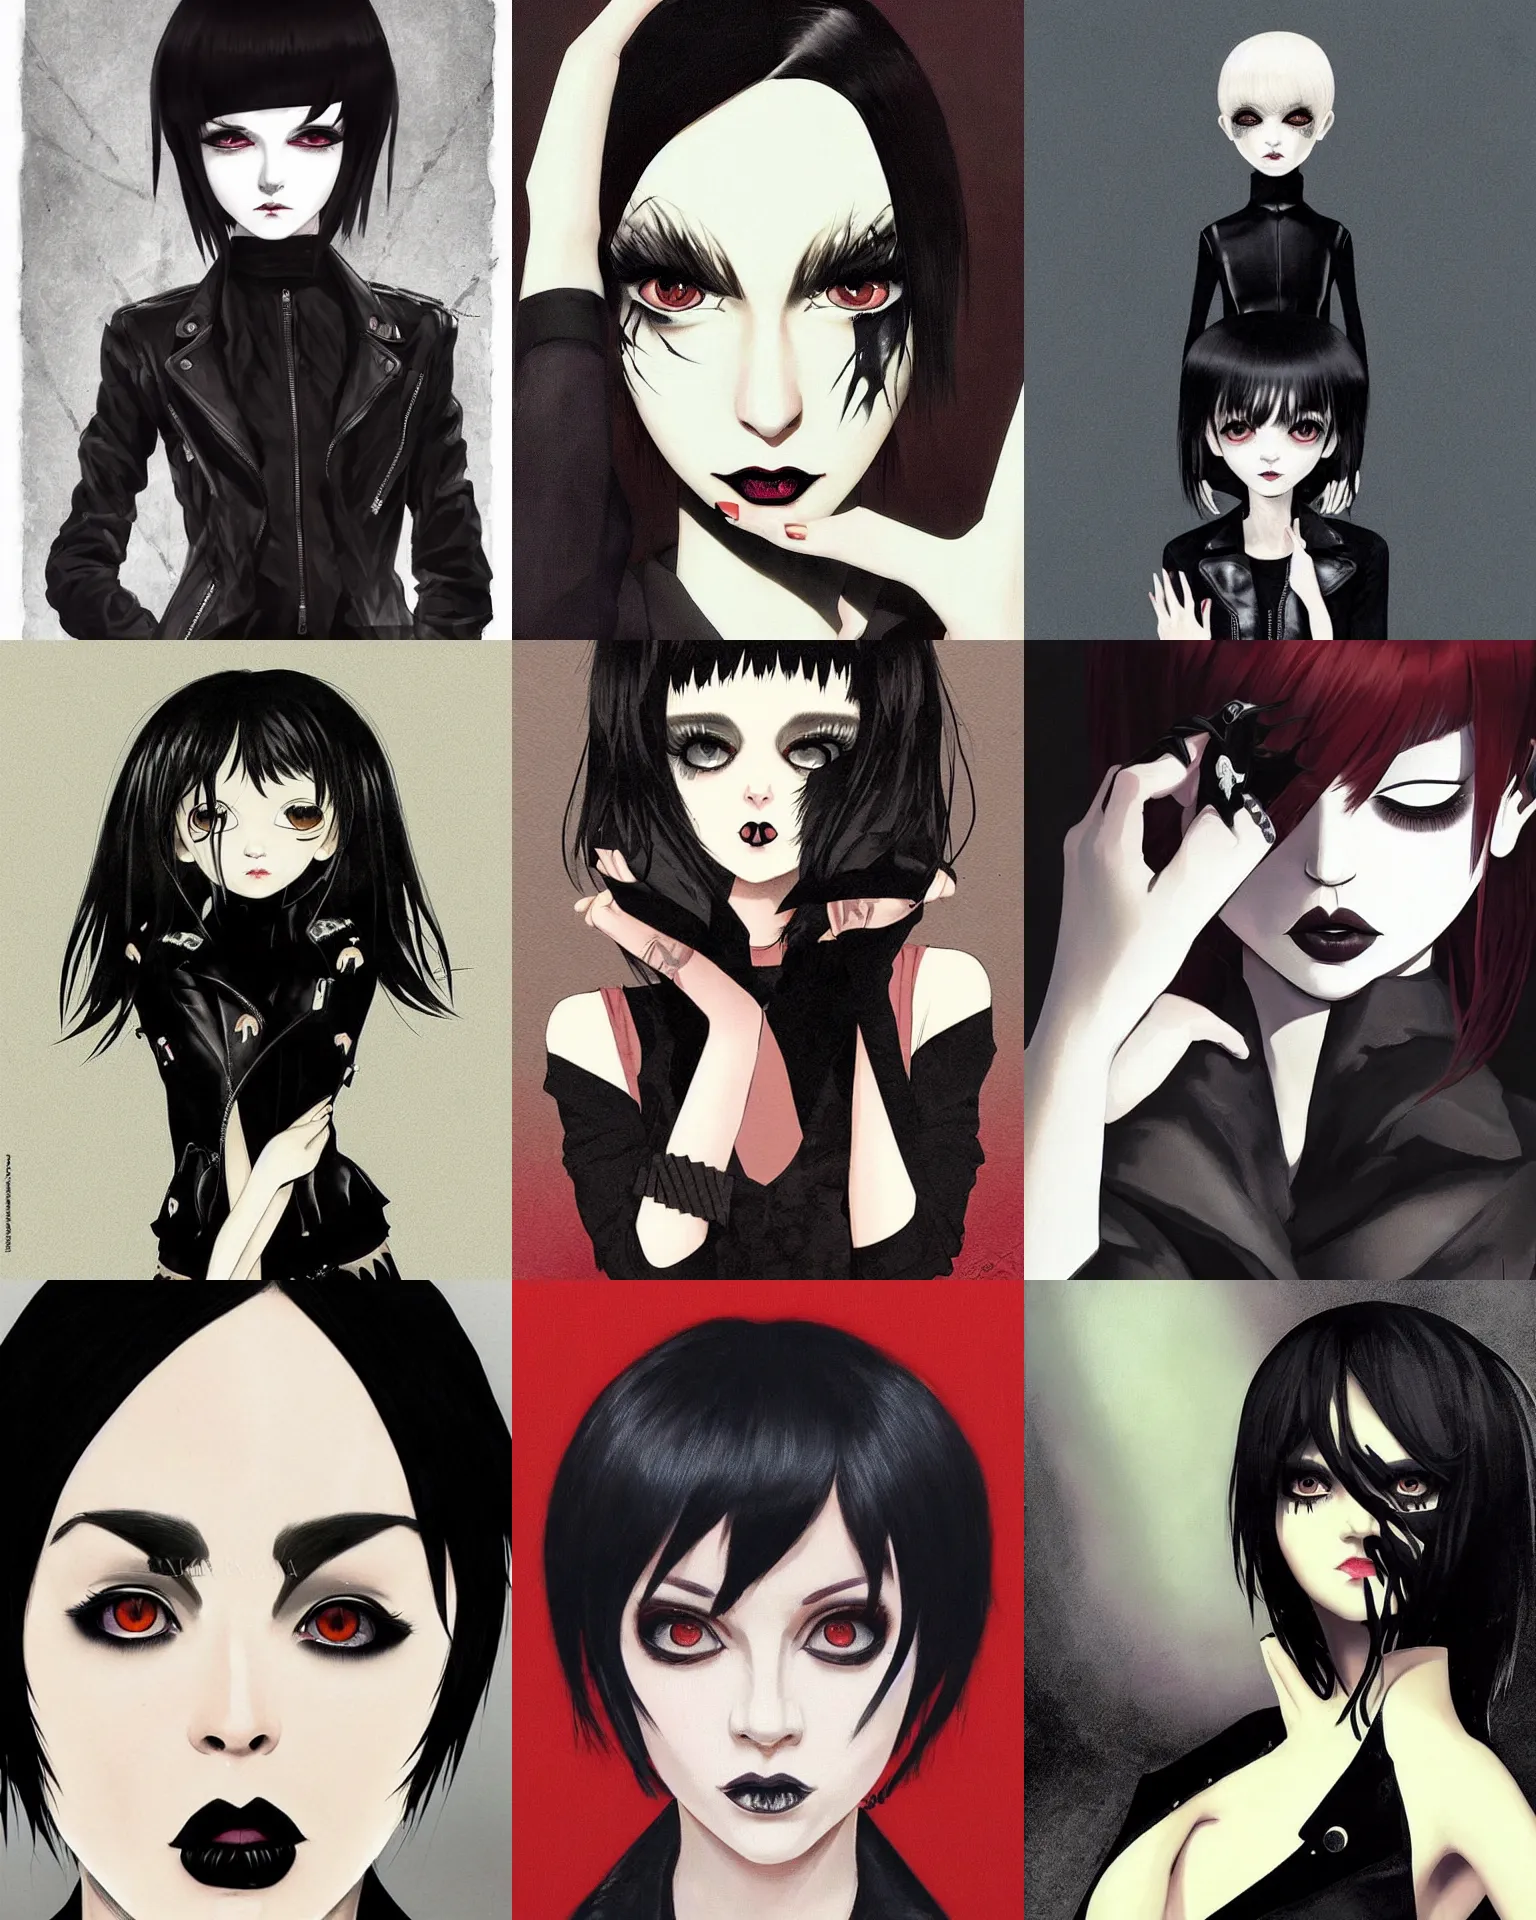 Prompt: A goth portrait by Ilya Kuvshinov. She has large evil eyes with entirely-black sclerae!!!!!! Her hair is dark brown and cut into a short, messy pixie cut. She has a slightly rounded face, with a pointed chin, and a small nose. She is wearing a black leather jacket, a black knee-length skirt, a black choker, and black leather boots.